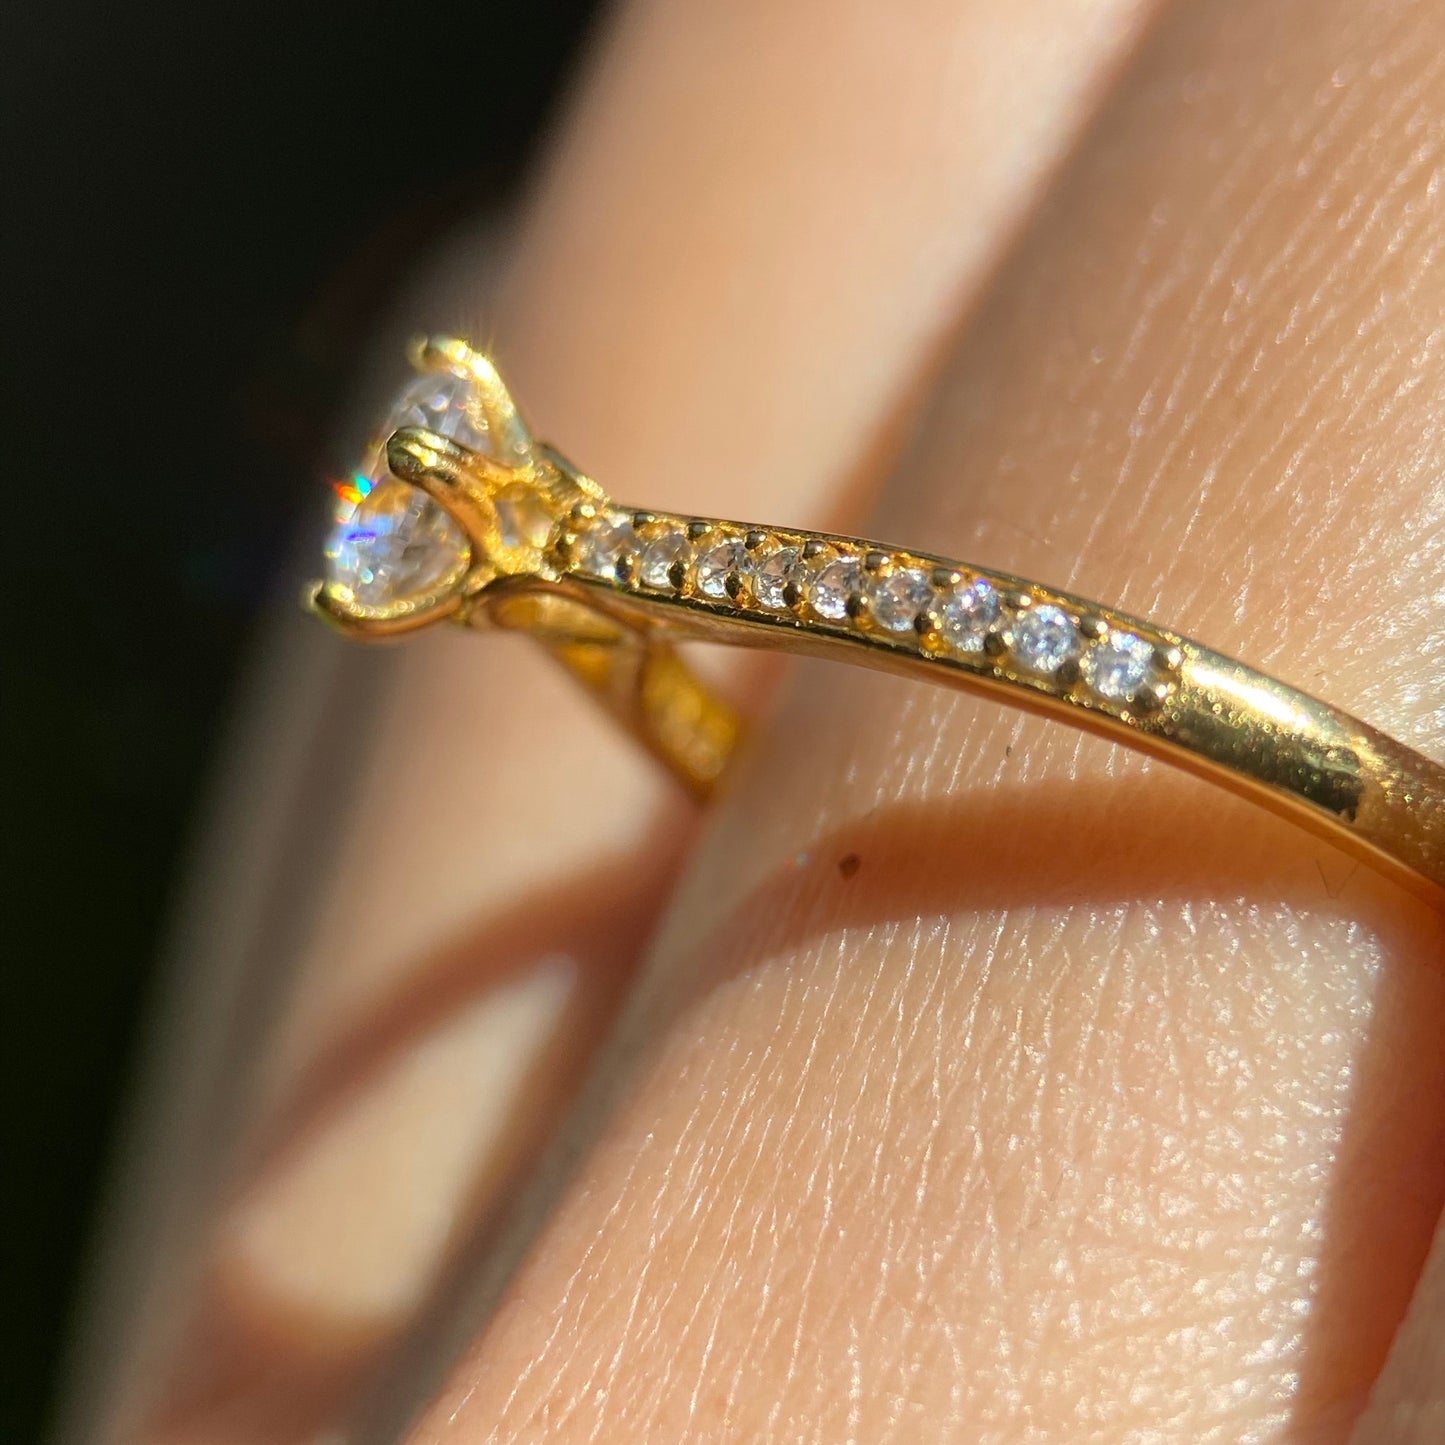 Arnel ring in 10k yellow gold with zirconias 